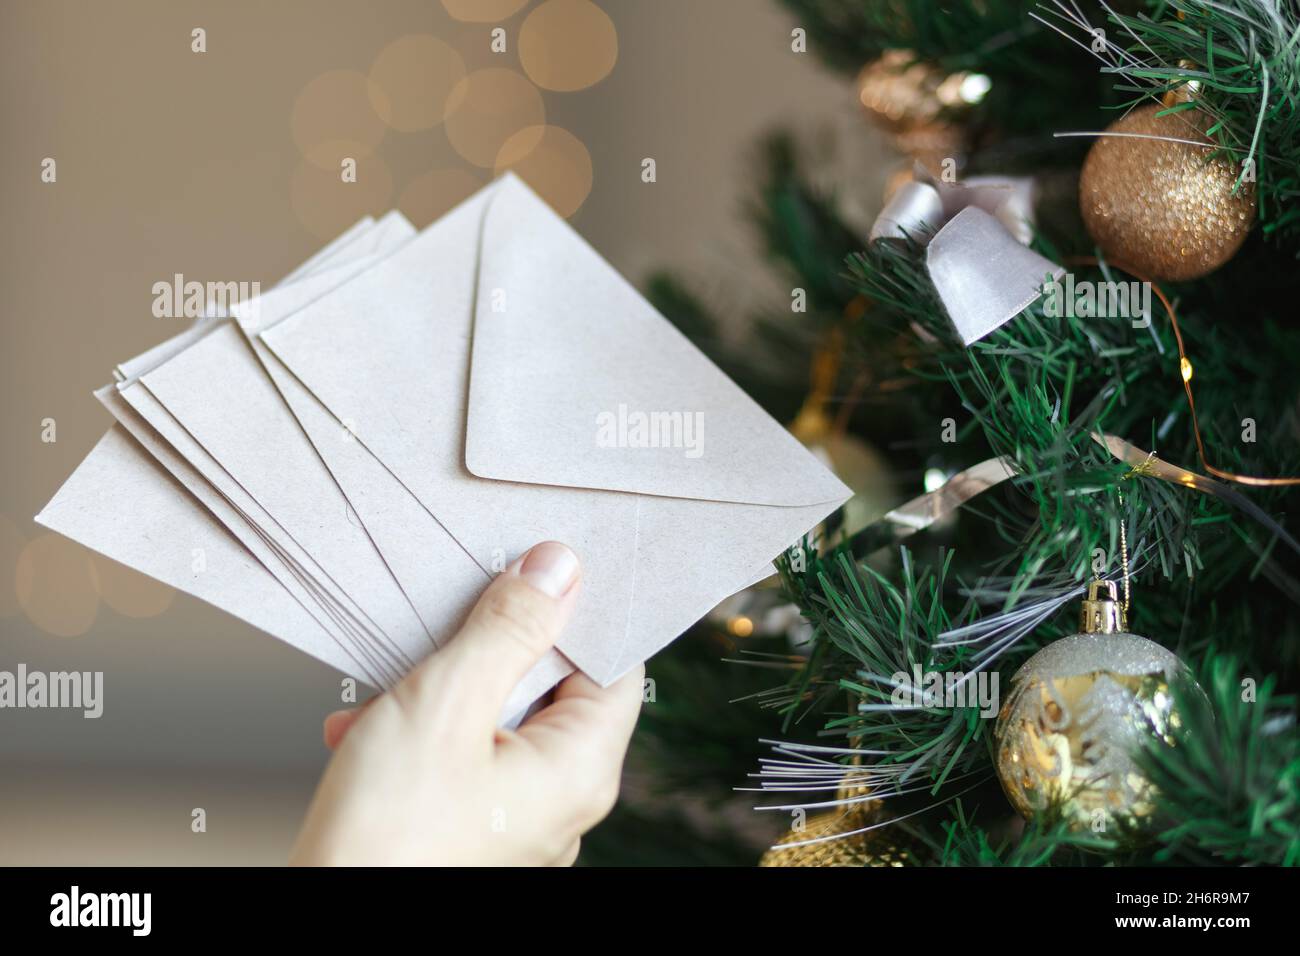 https://c8.alamy.com/comp/2H6R9M7/hand-holding-stack-of-craft-paper-envelopes-for-christmas-greeting-card-invitation-design-on-christmas-tree-background-with-bokeh-2H6R9M7.jpg